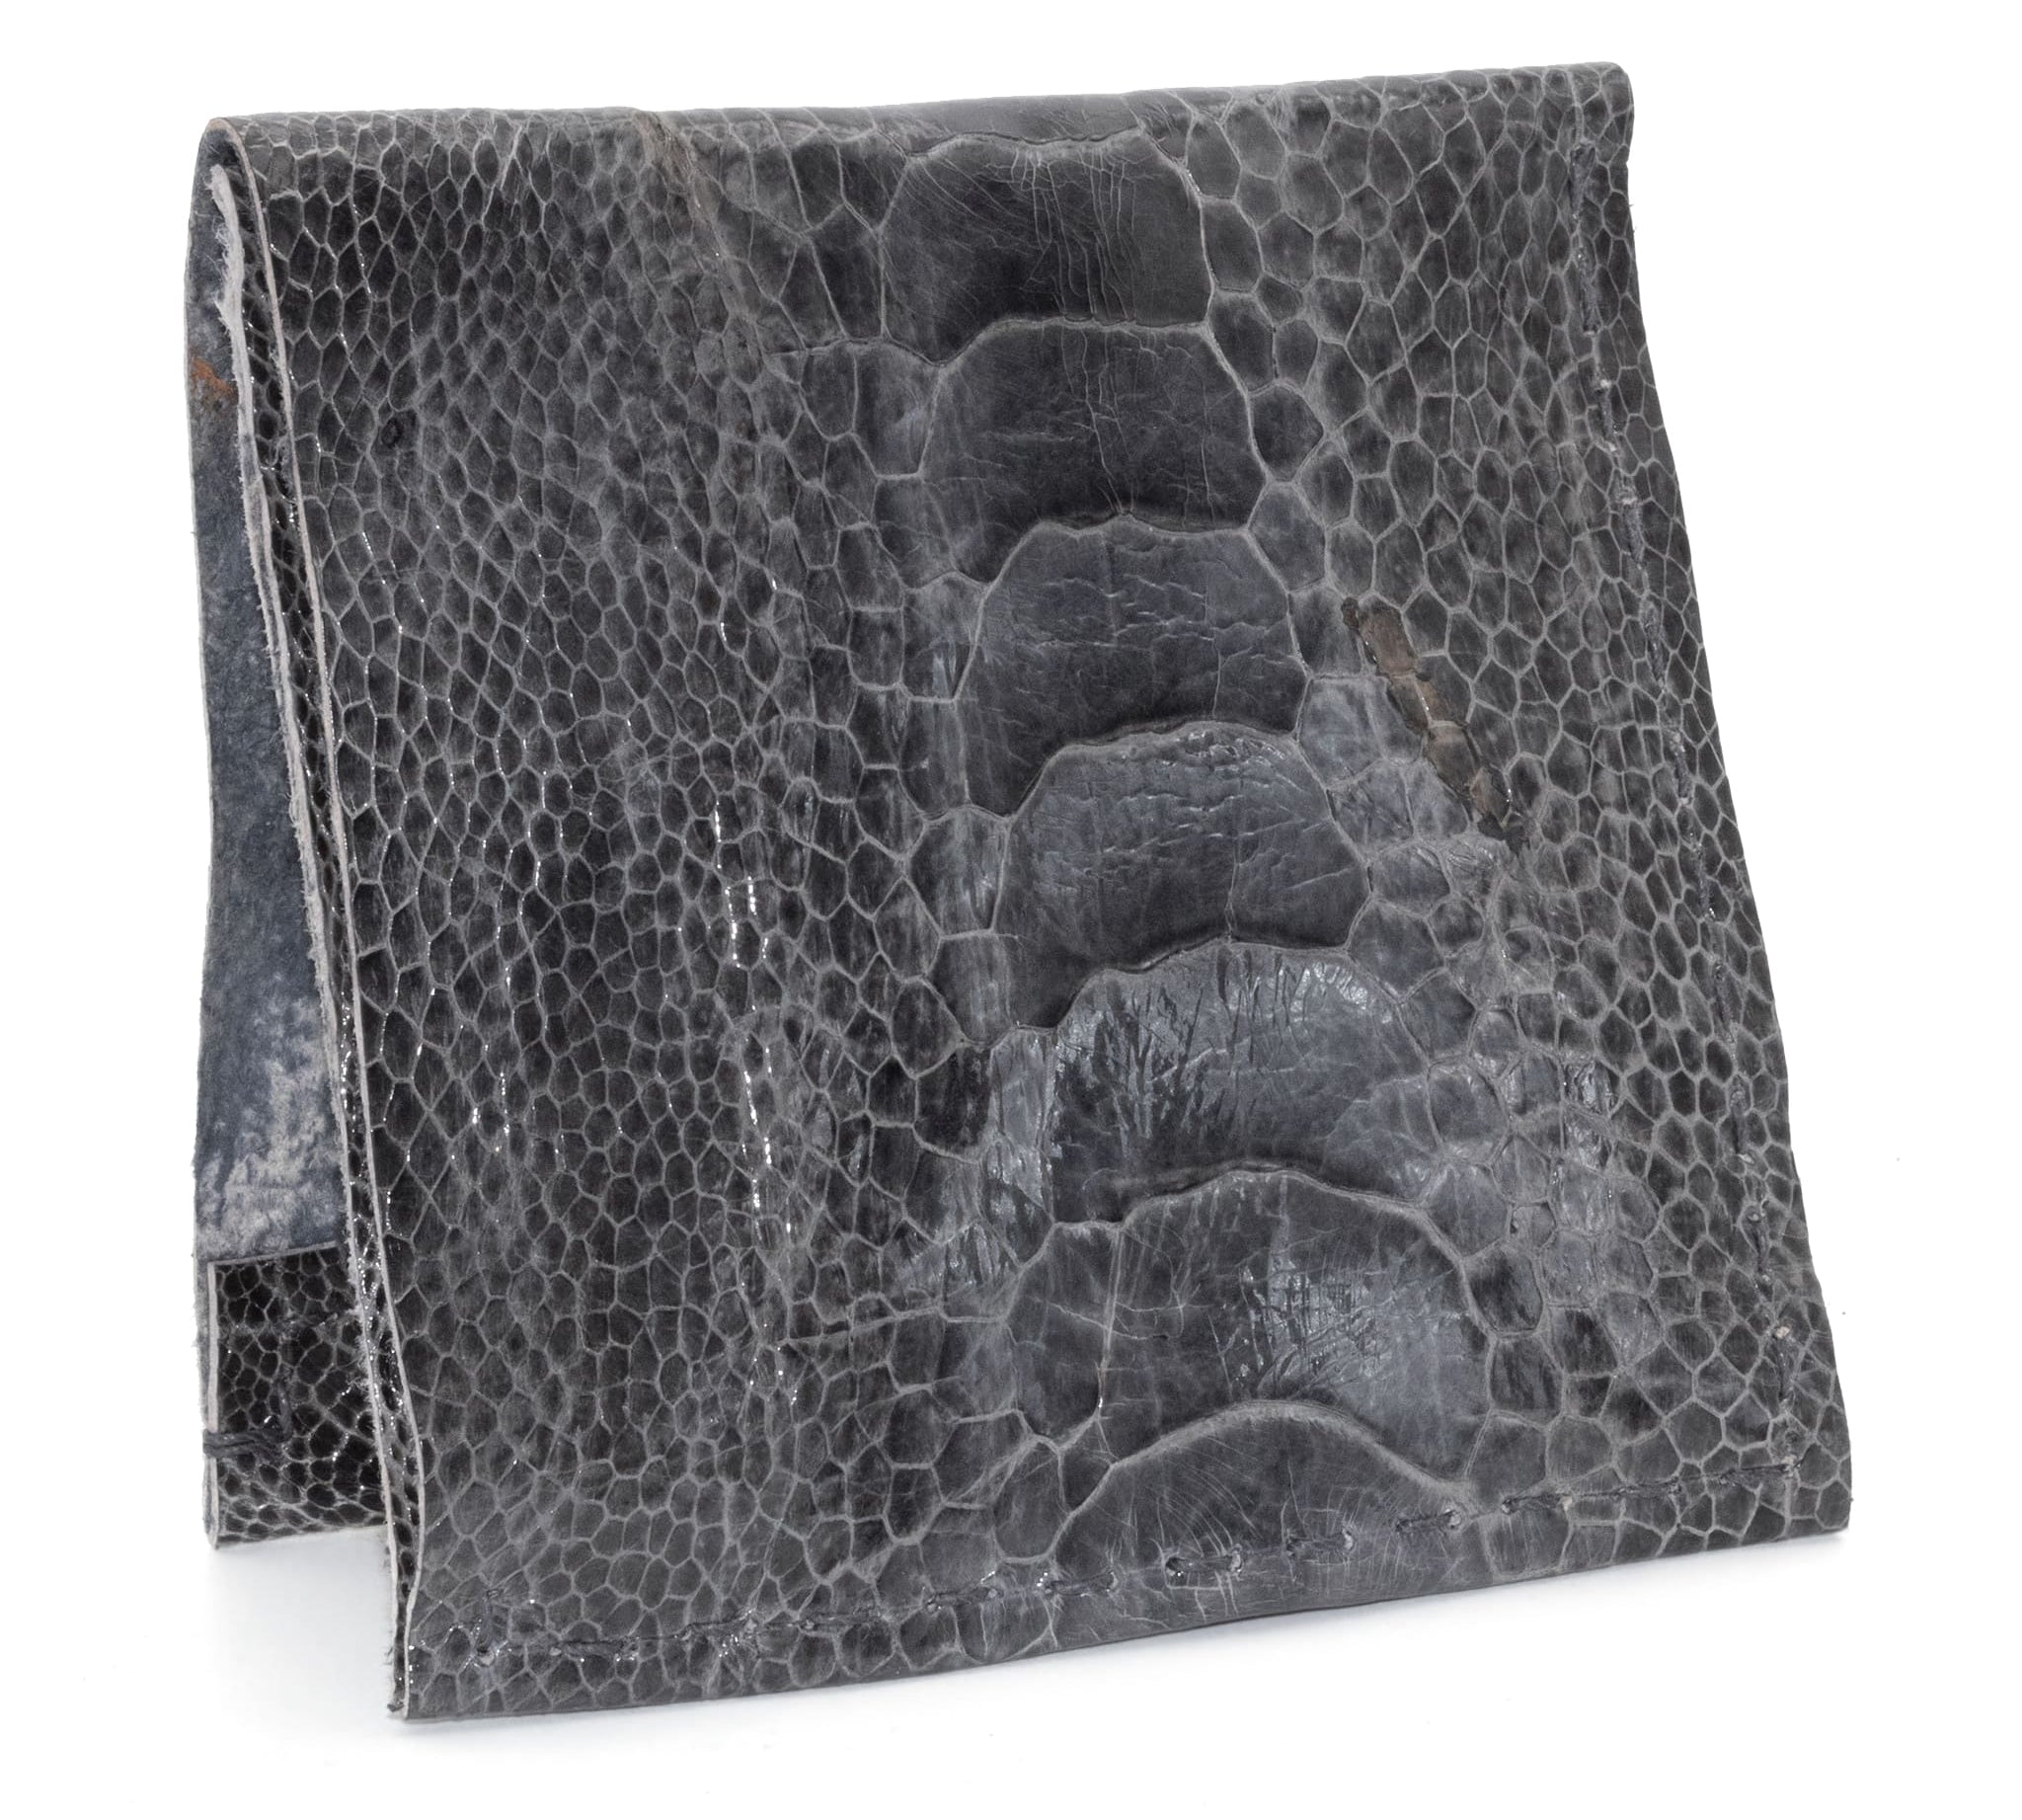 hand sewn one piece bifold wallet crafted from a 1mm distressed black ostrich leather from atelier skn